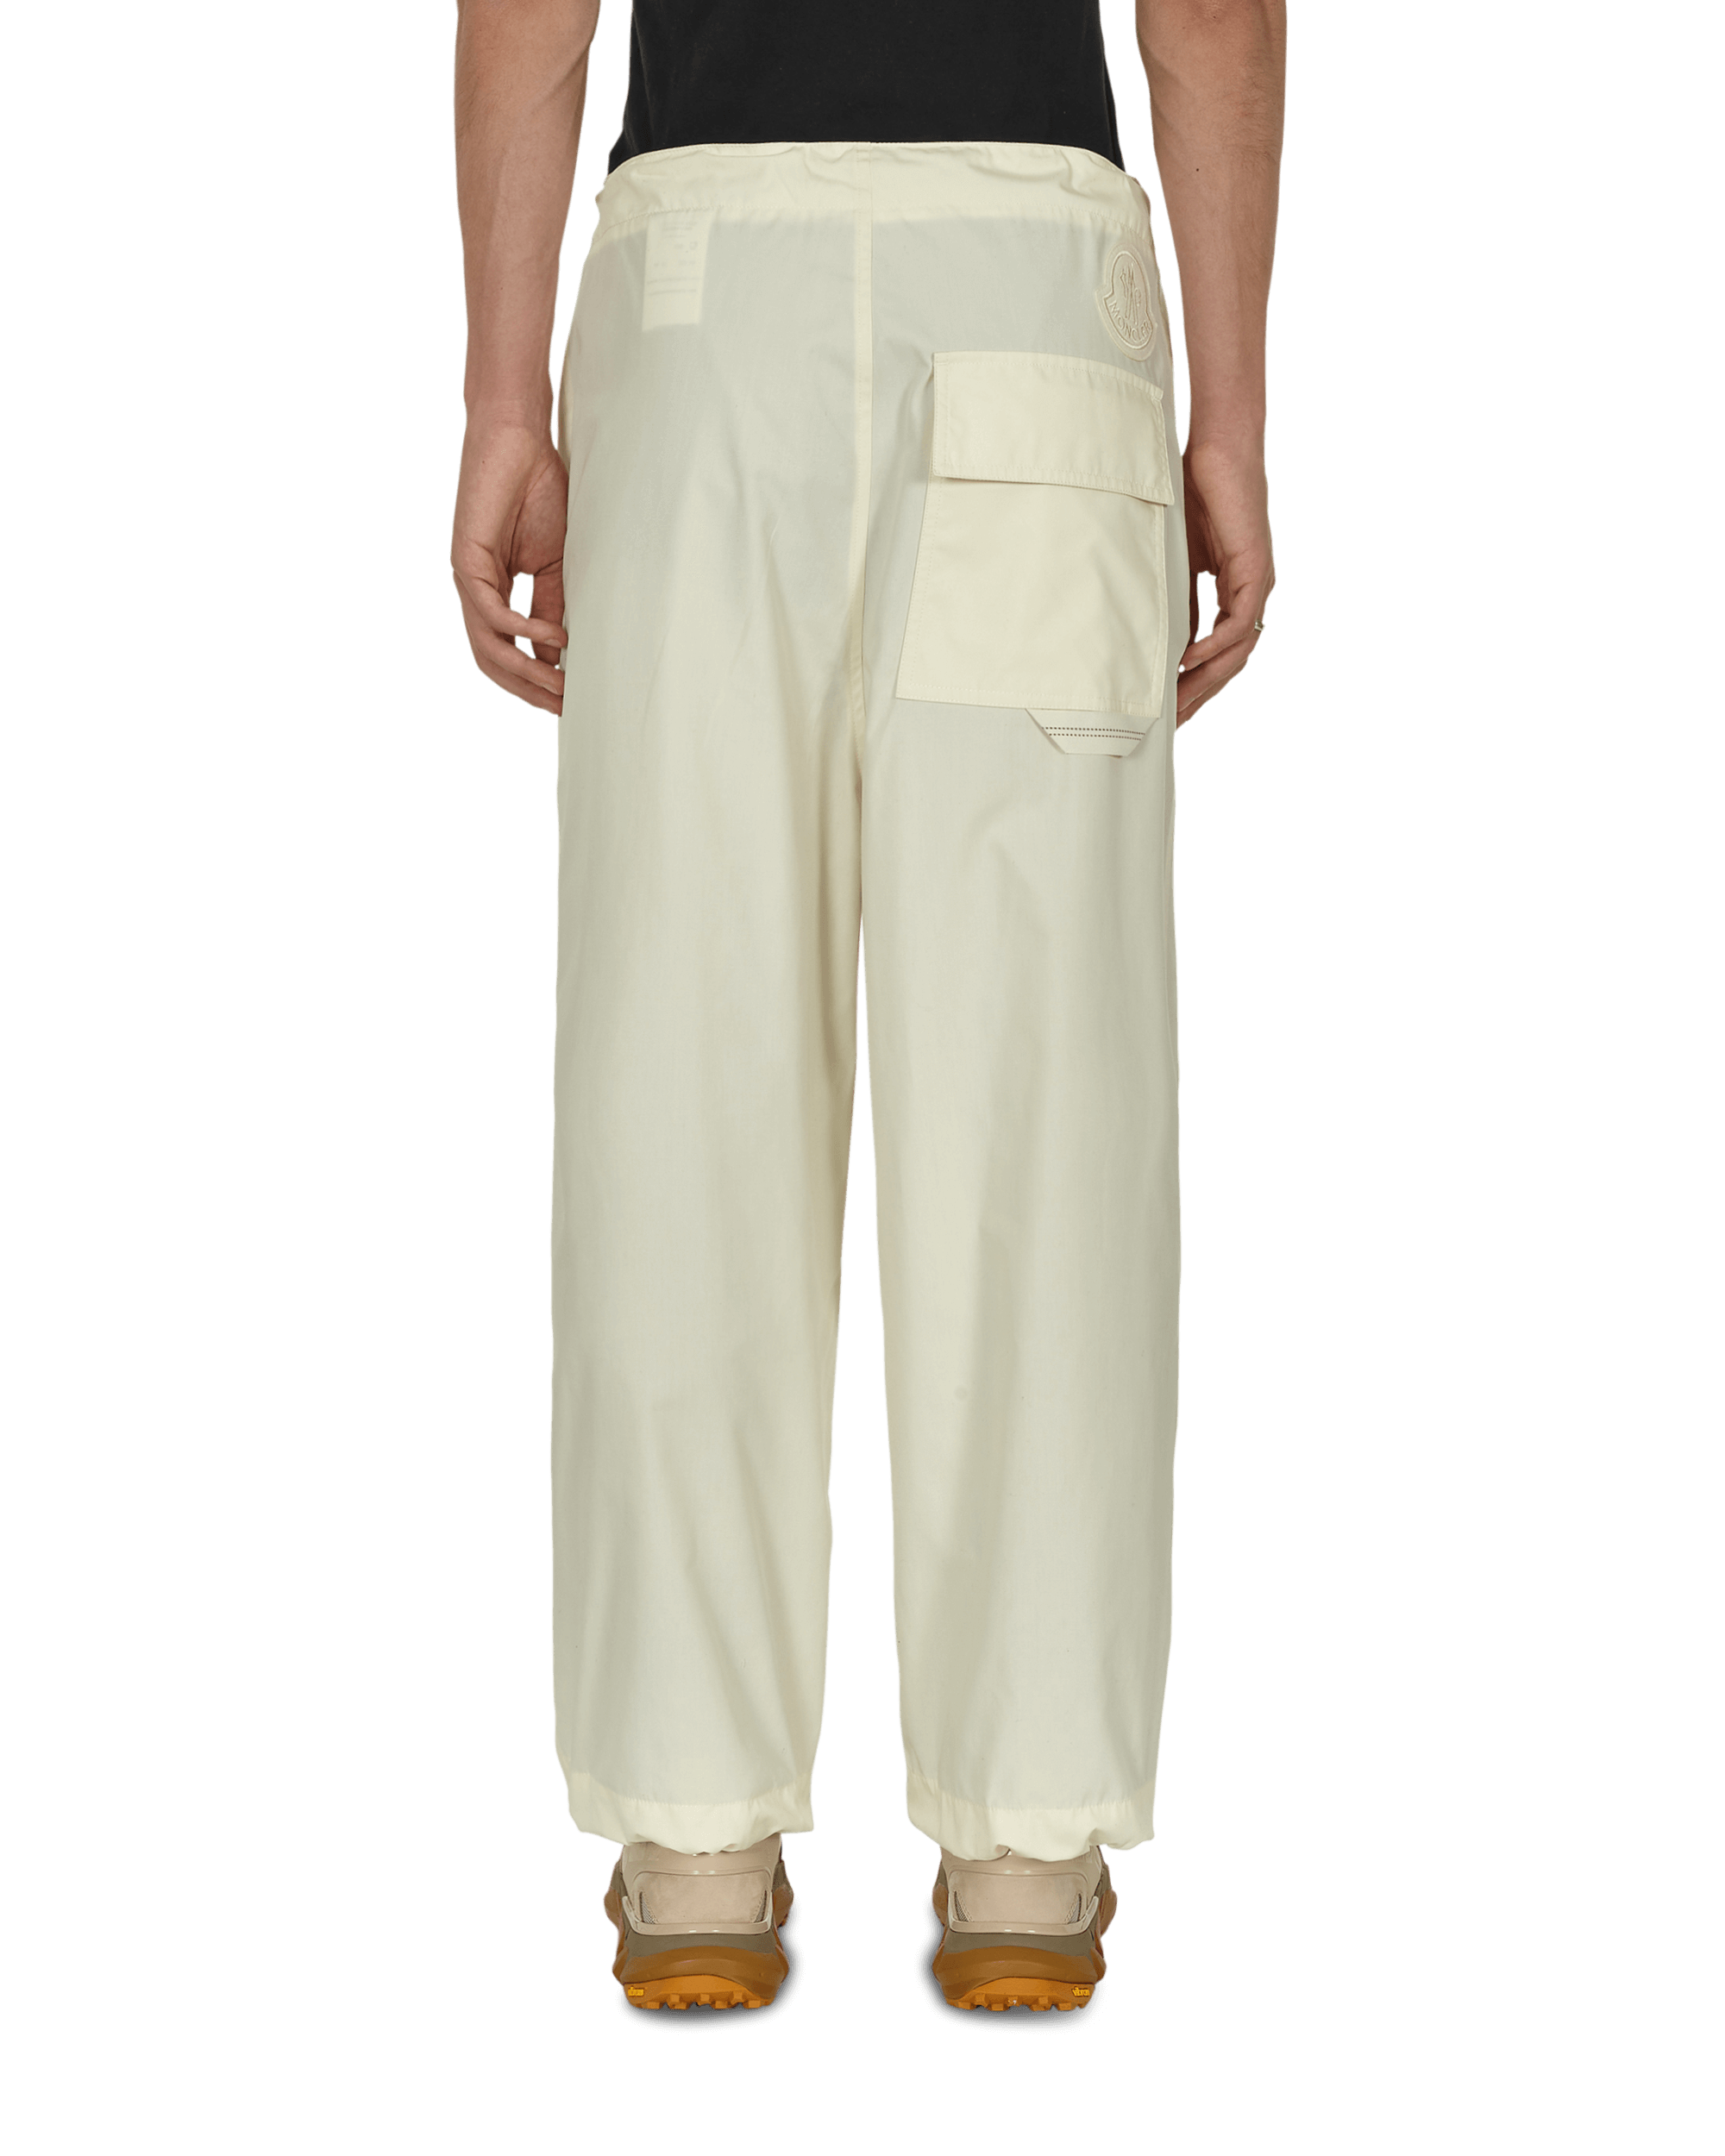 Moncler Genius Trousers White Pants Trousers H10922A00011 032